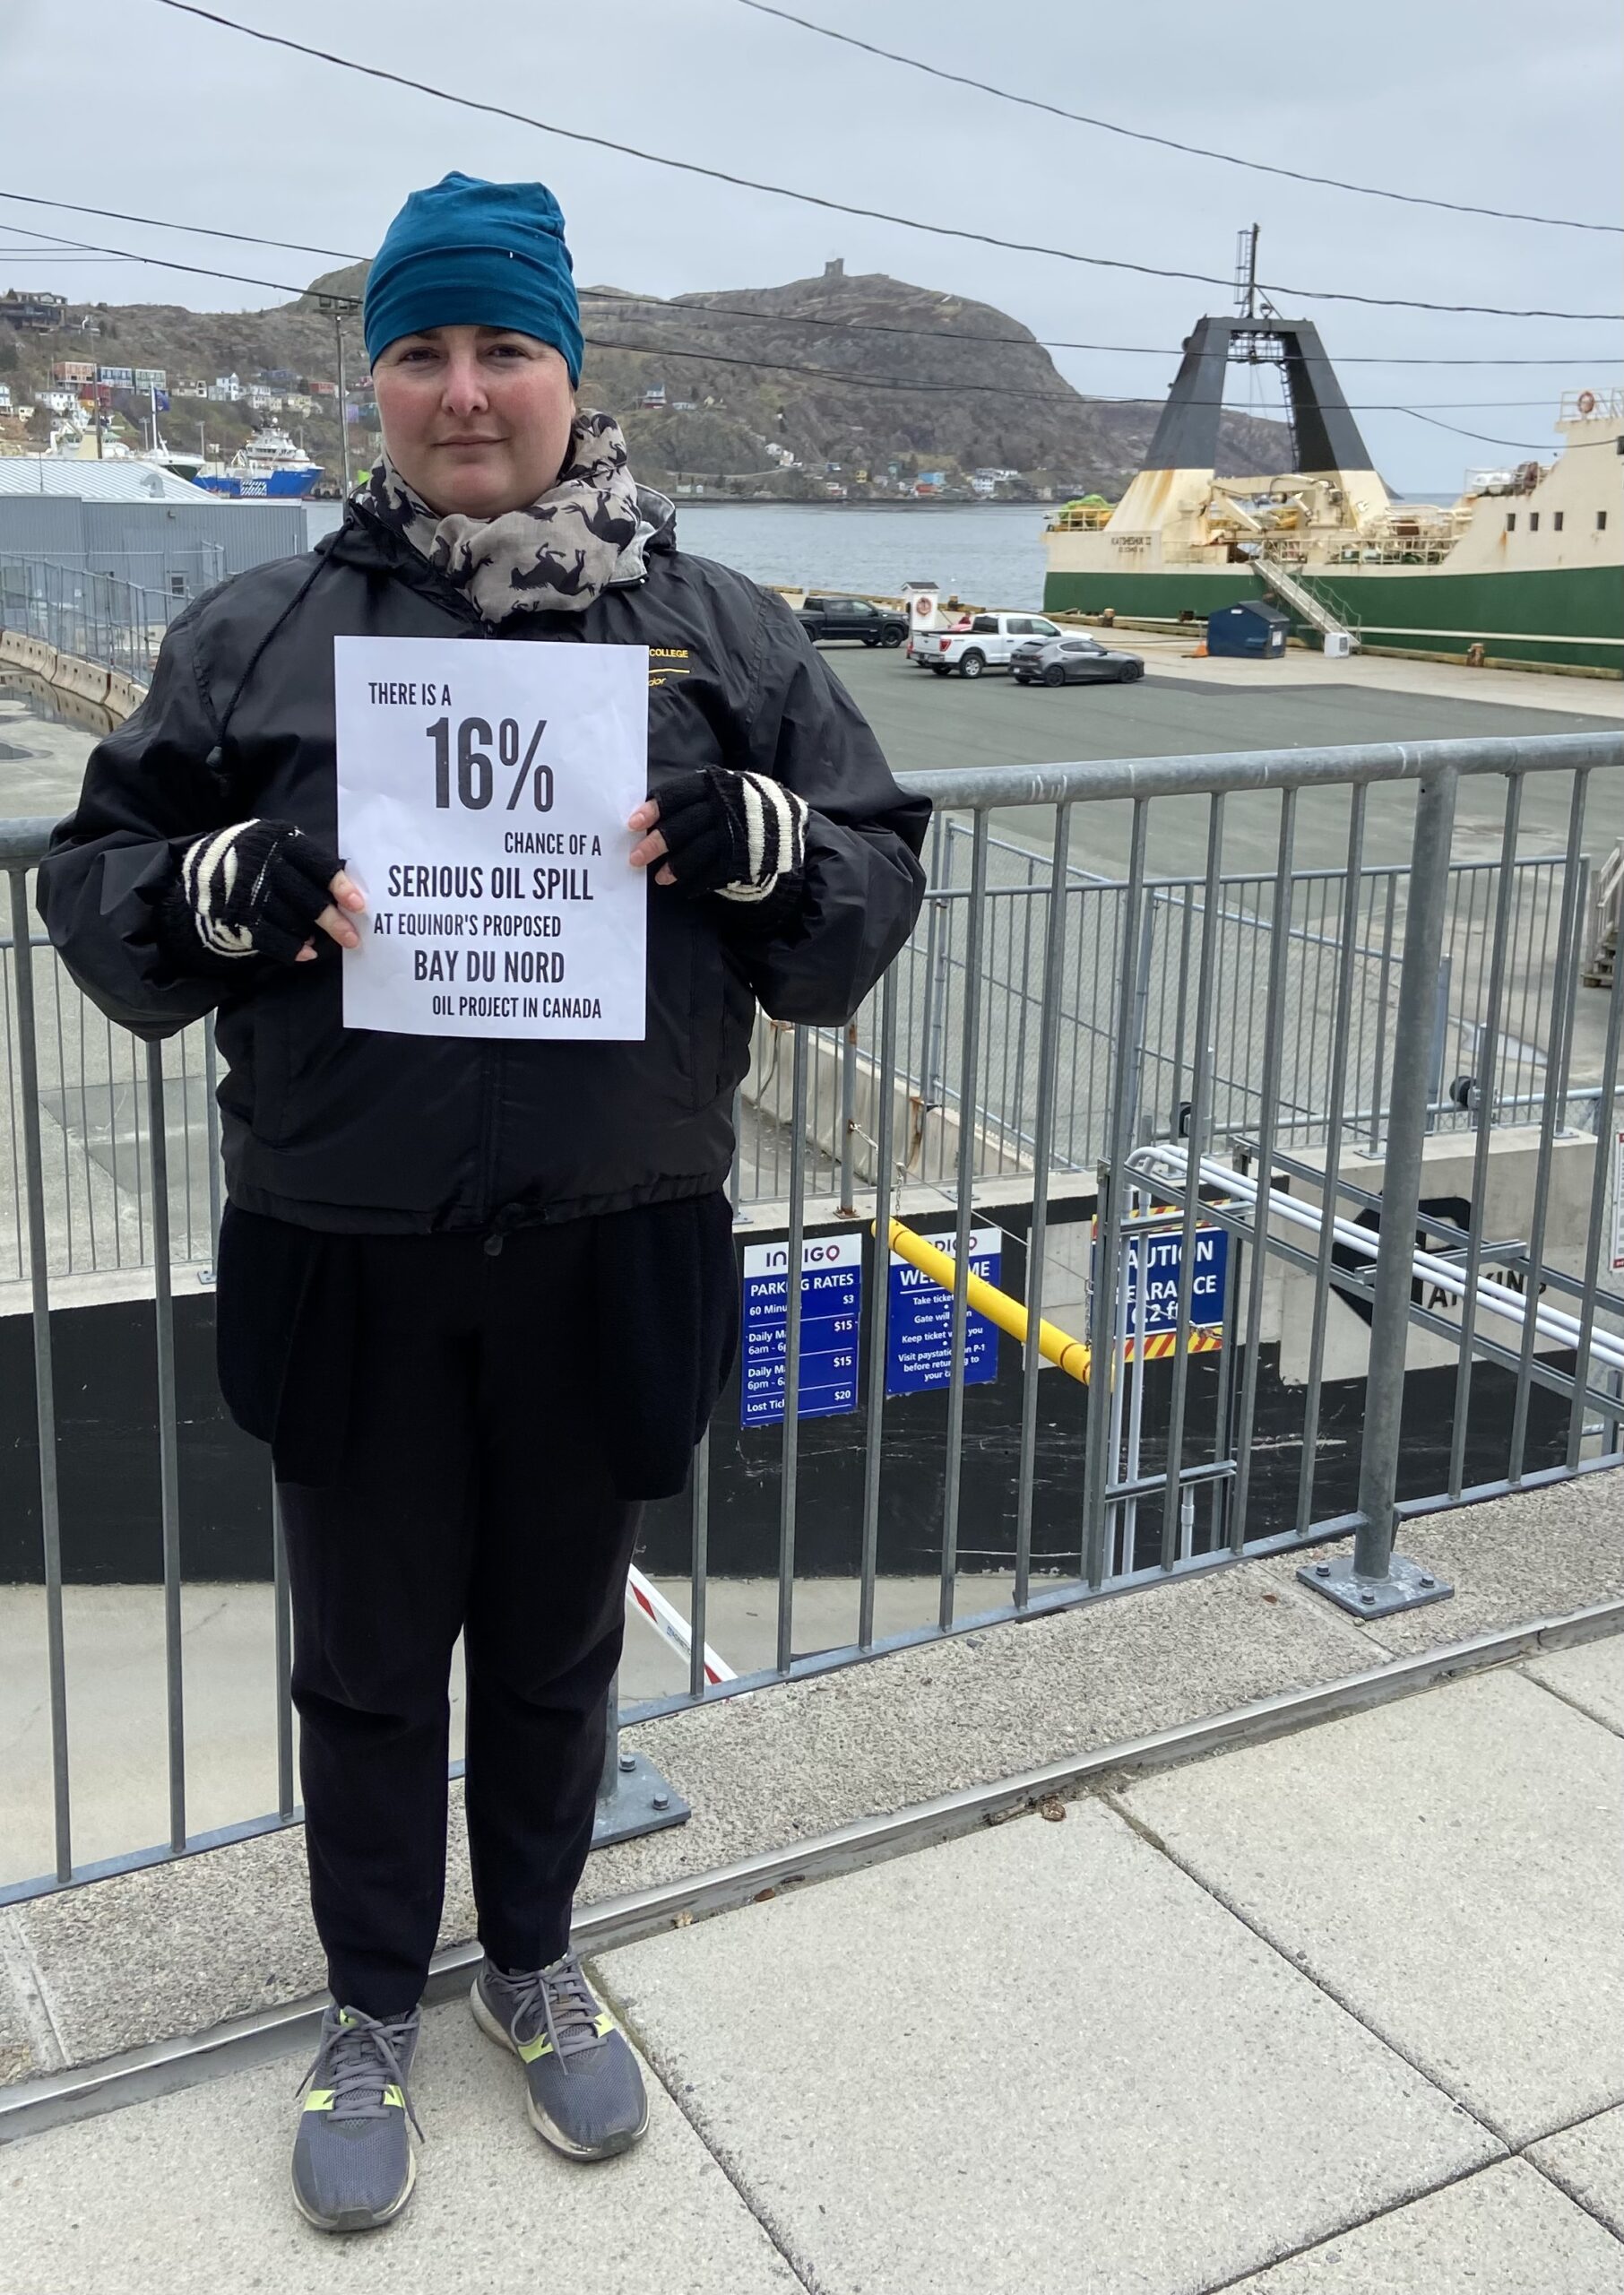 Supporting a Just Transition Off Oil and Gas in Newfoundland and Labrador